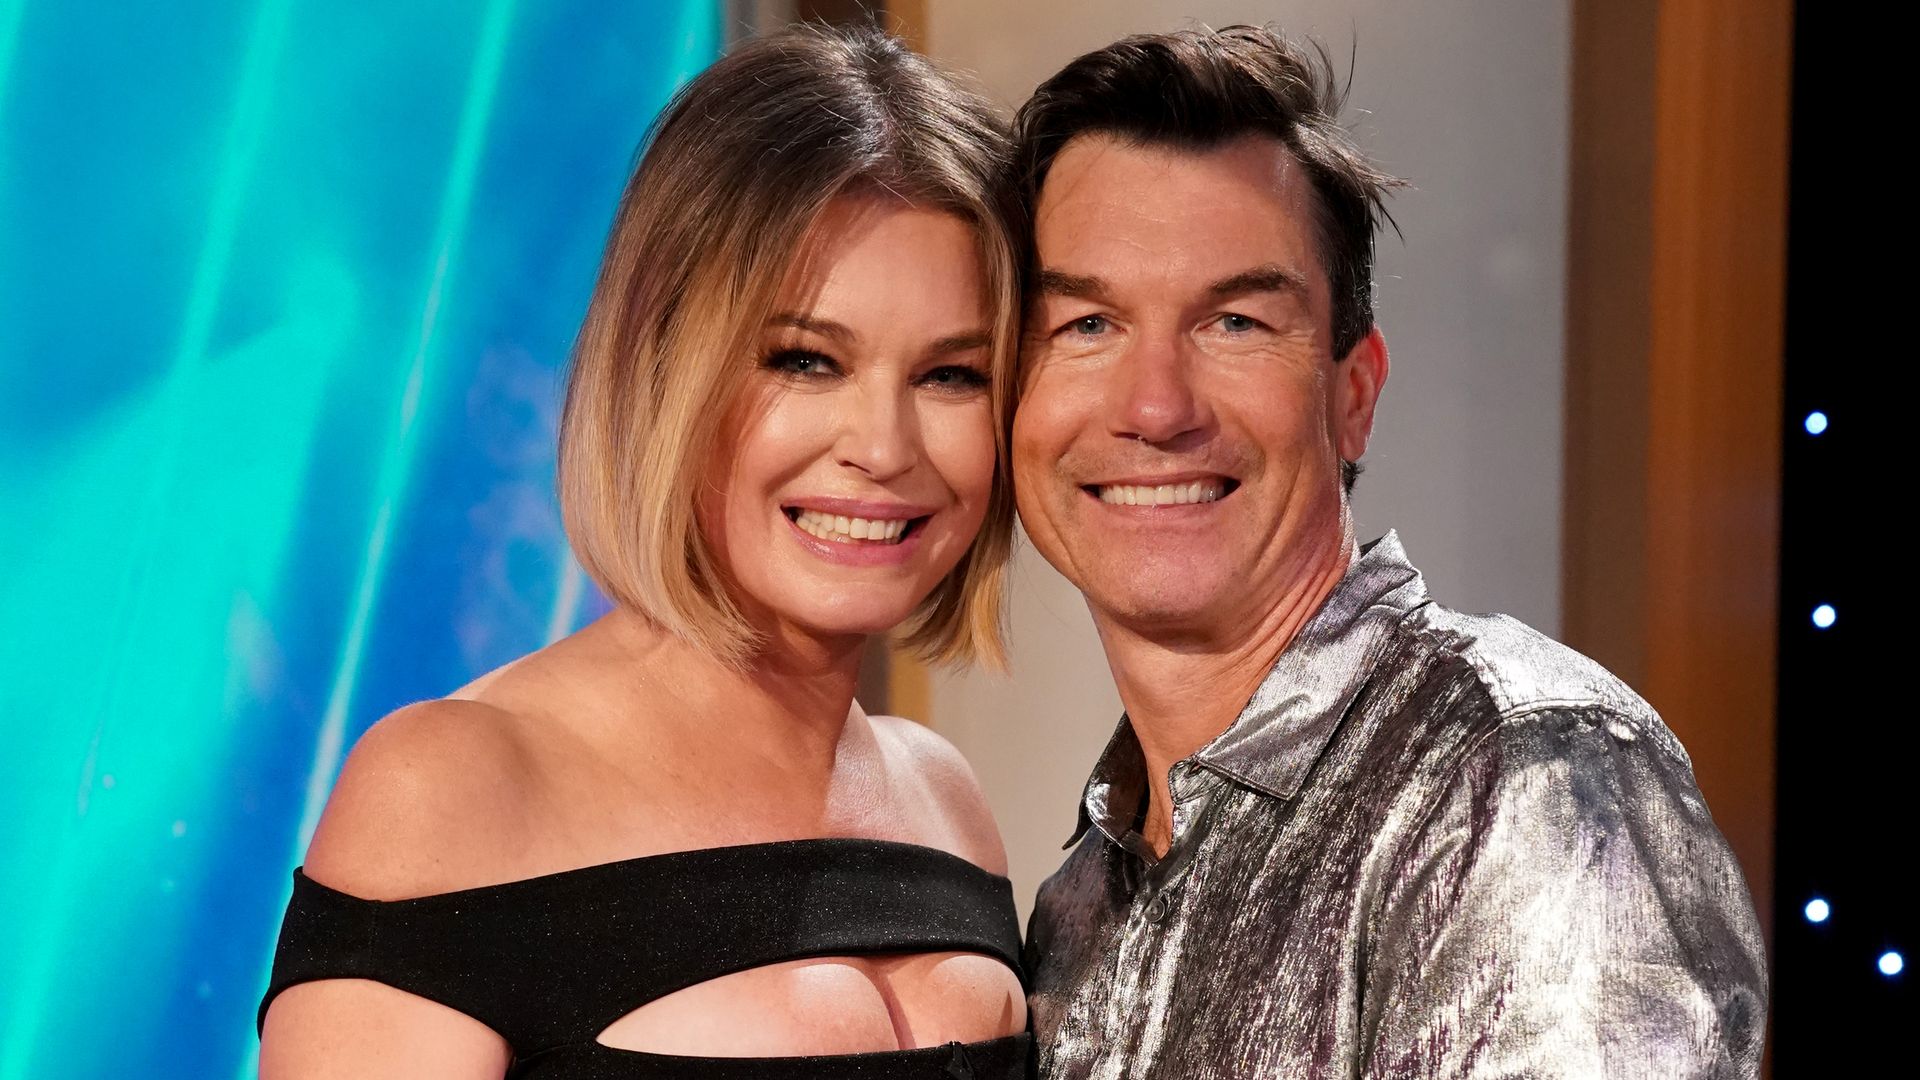 Rebecca Romijn and Jerry O'Connell hugging